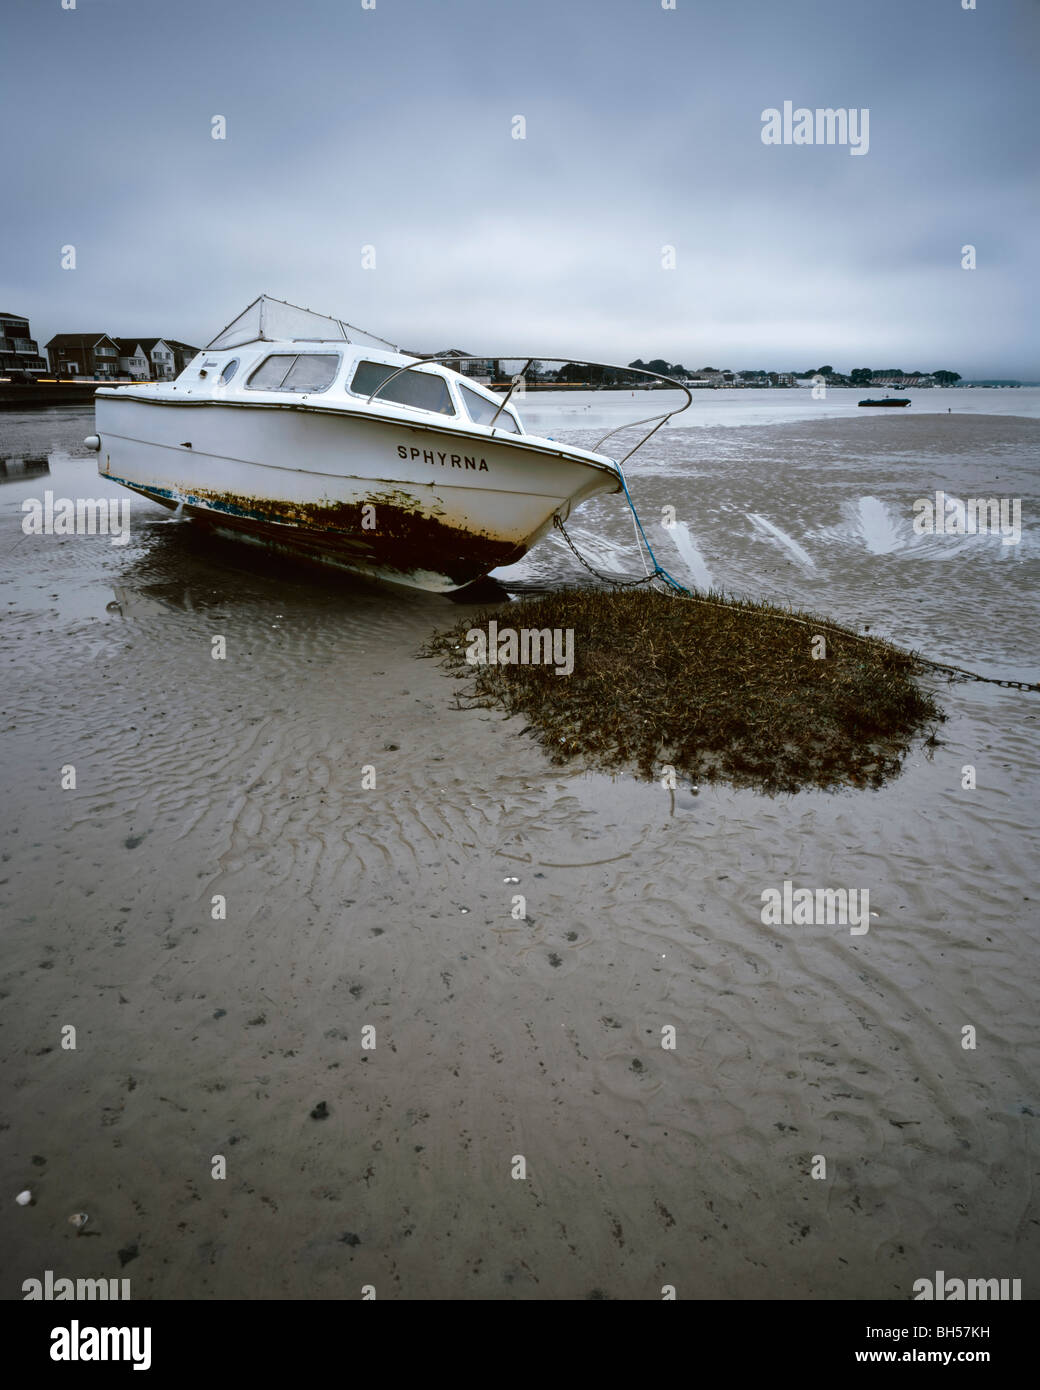 Boat on the sand in the bay of Poole in Dorset, UK, with the Sandbank visible in the background Stock Photo